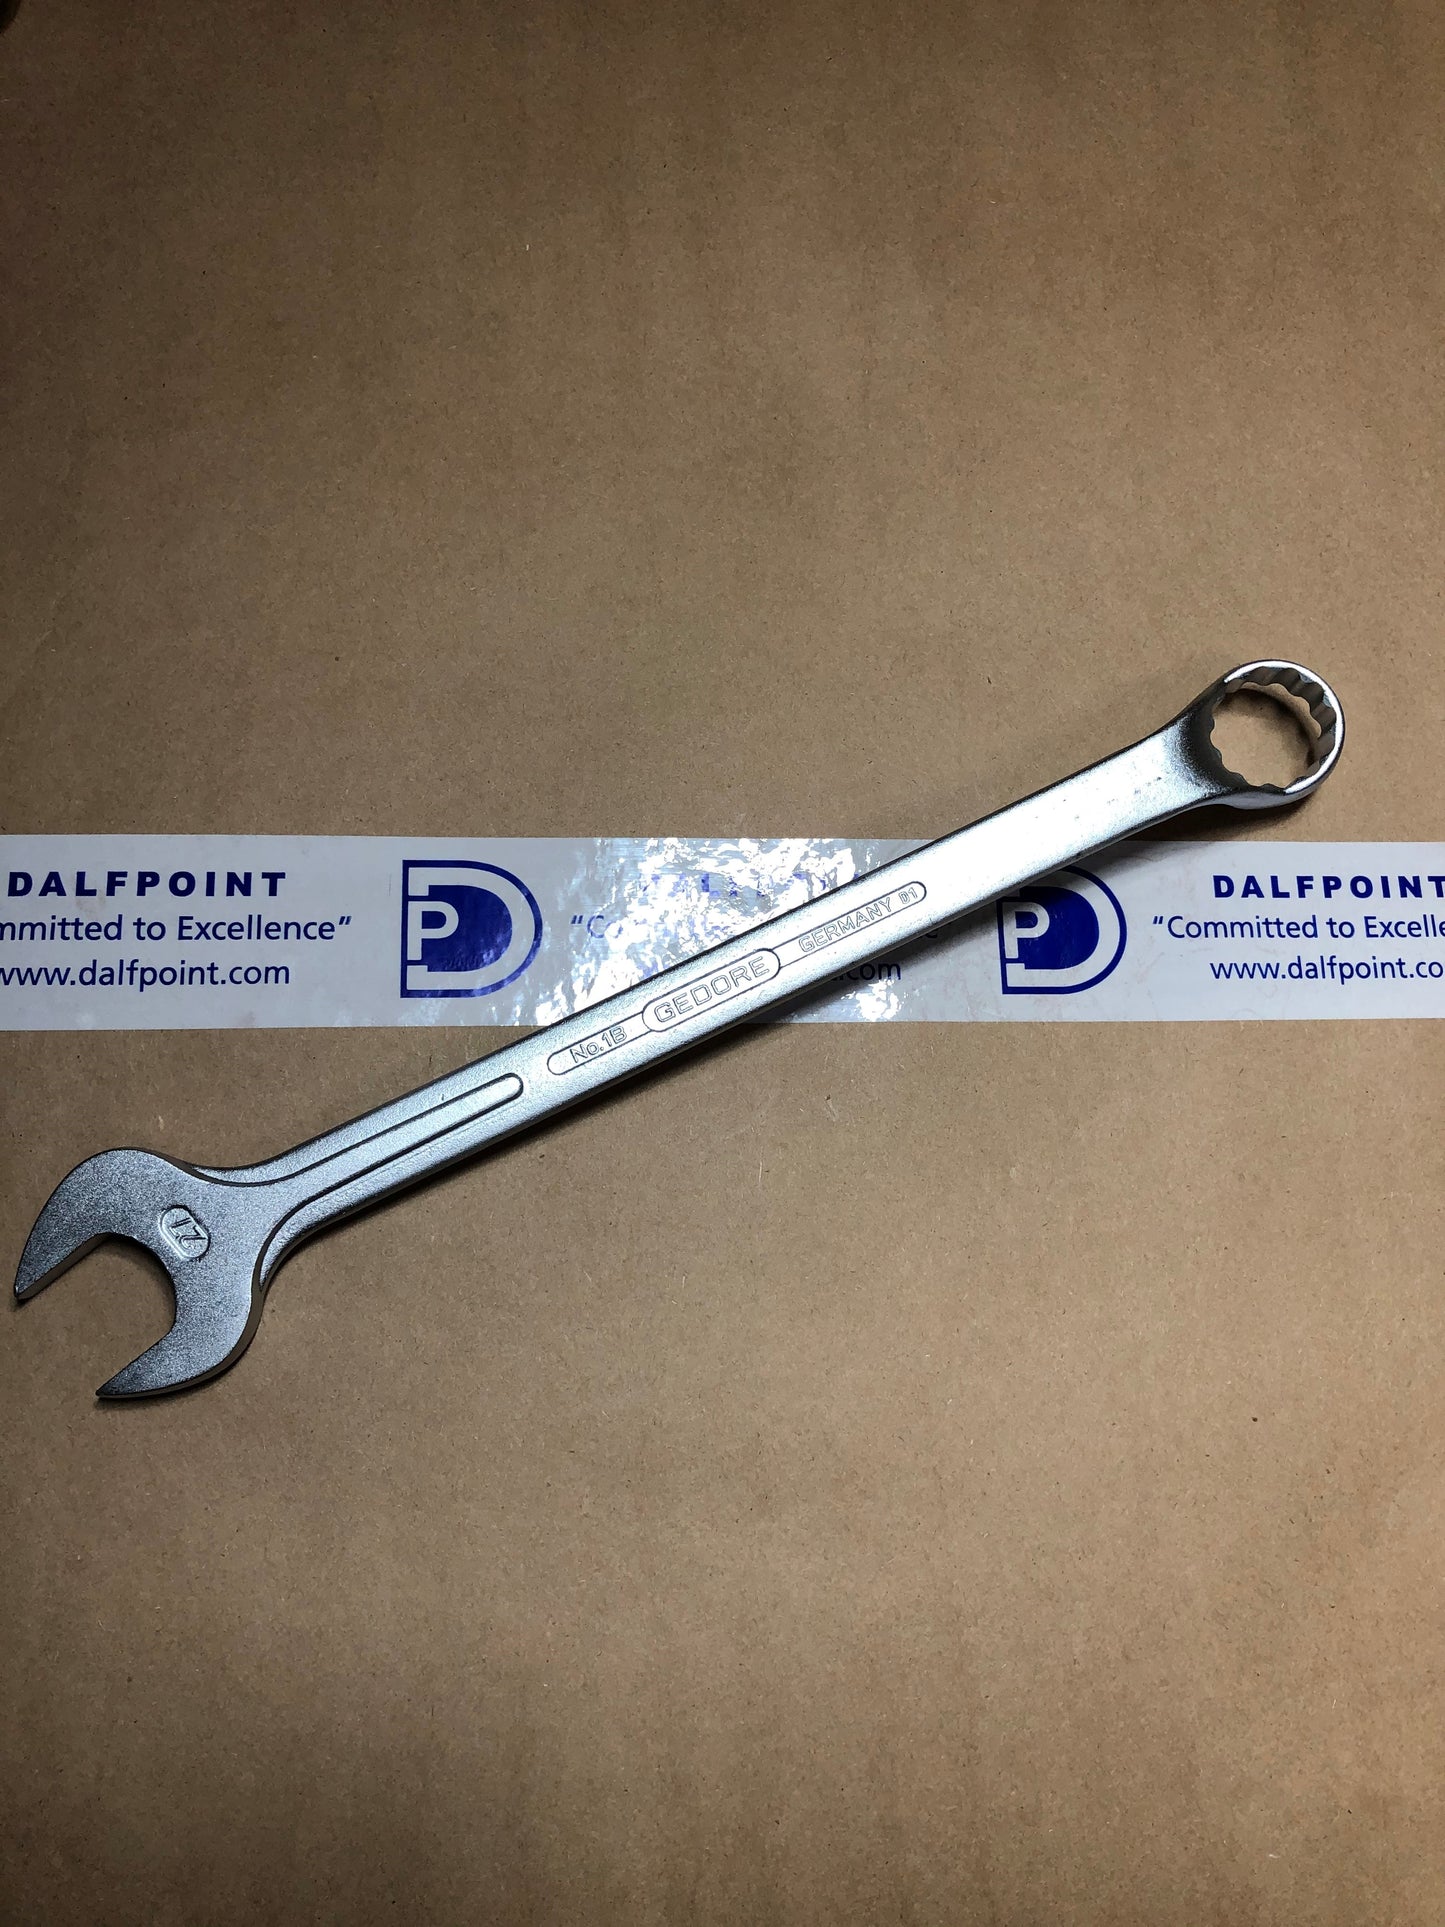 GEDORE 6002610 COMBINATION SPANNER 1 B 27, SIZE 27 MM